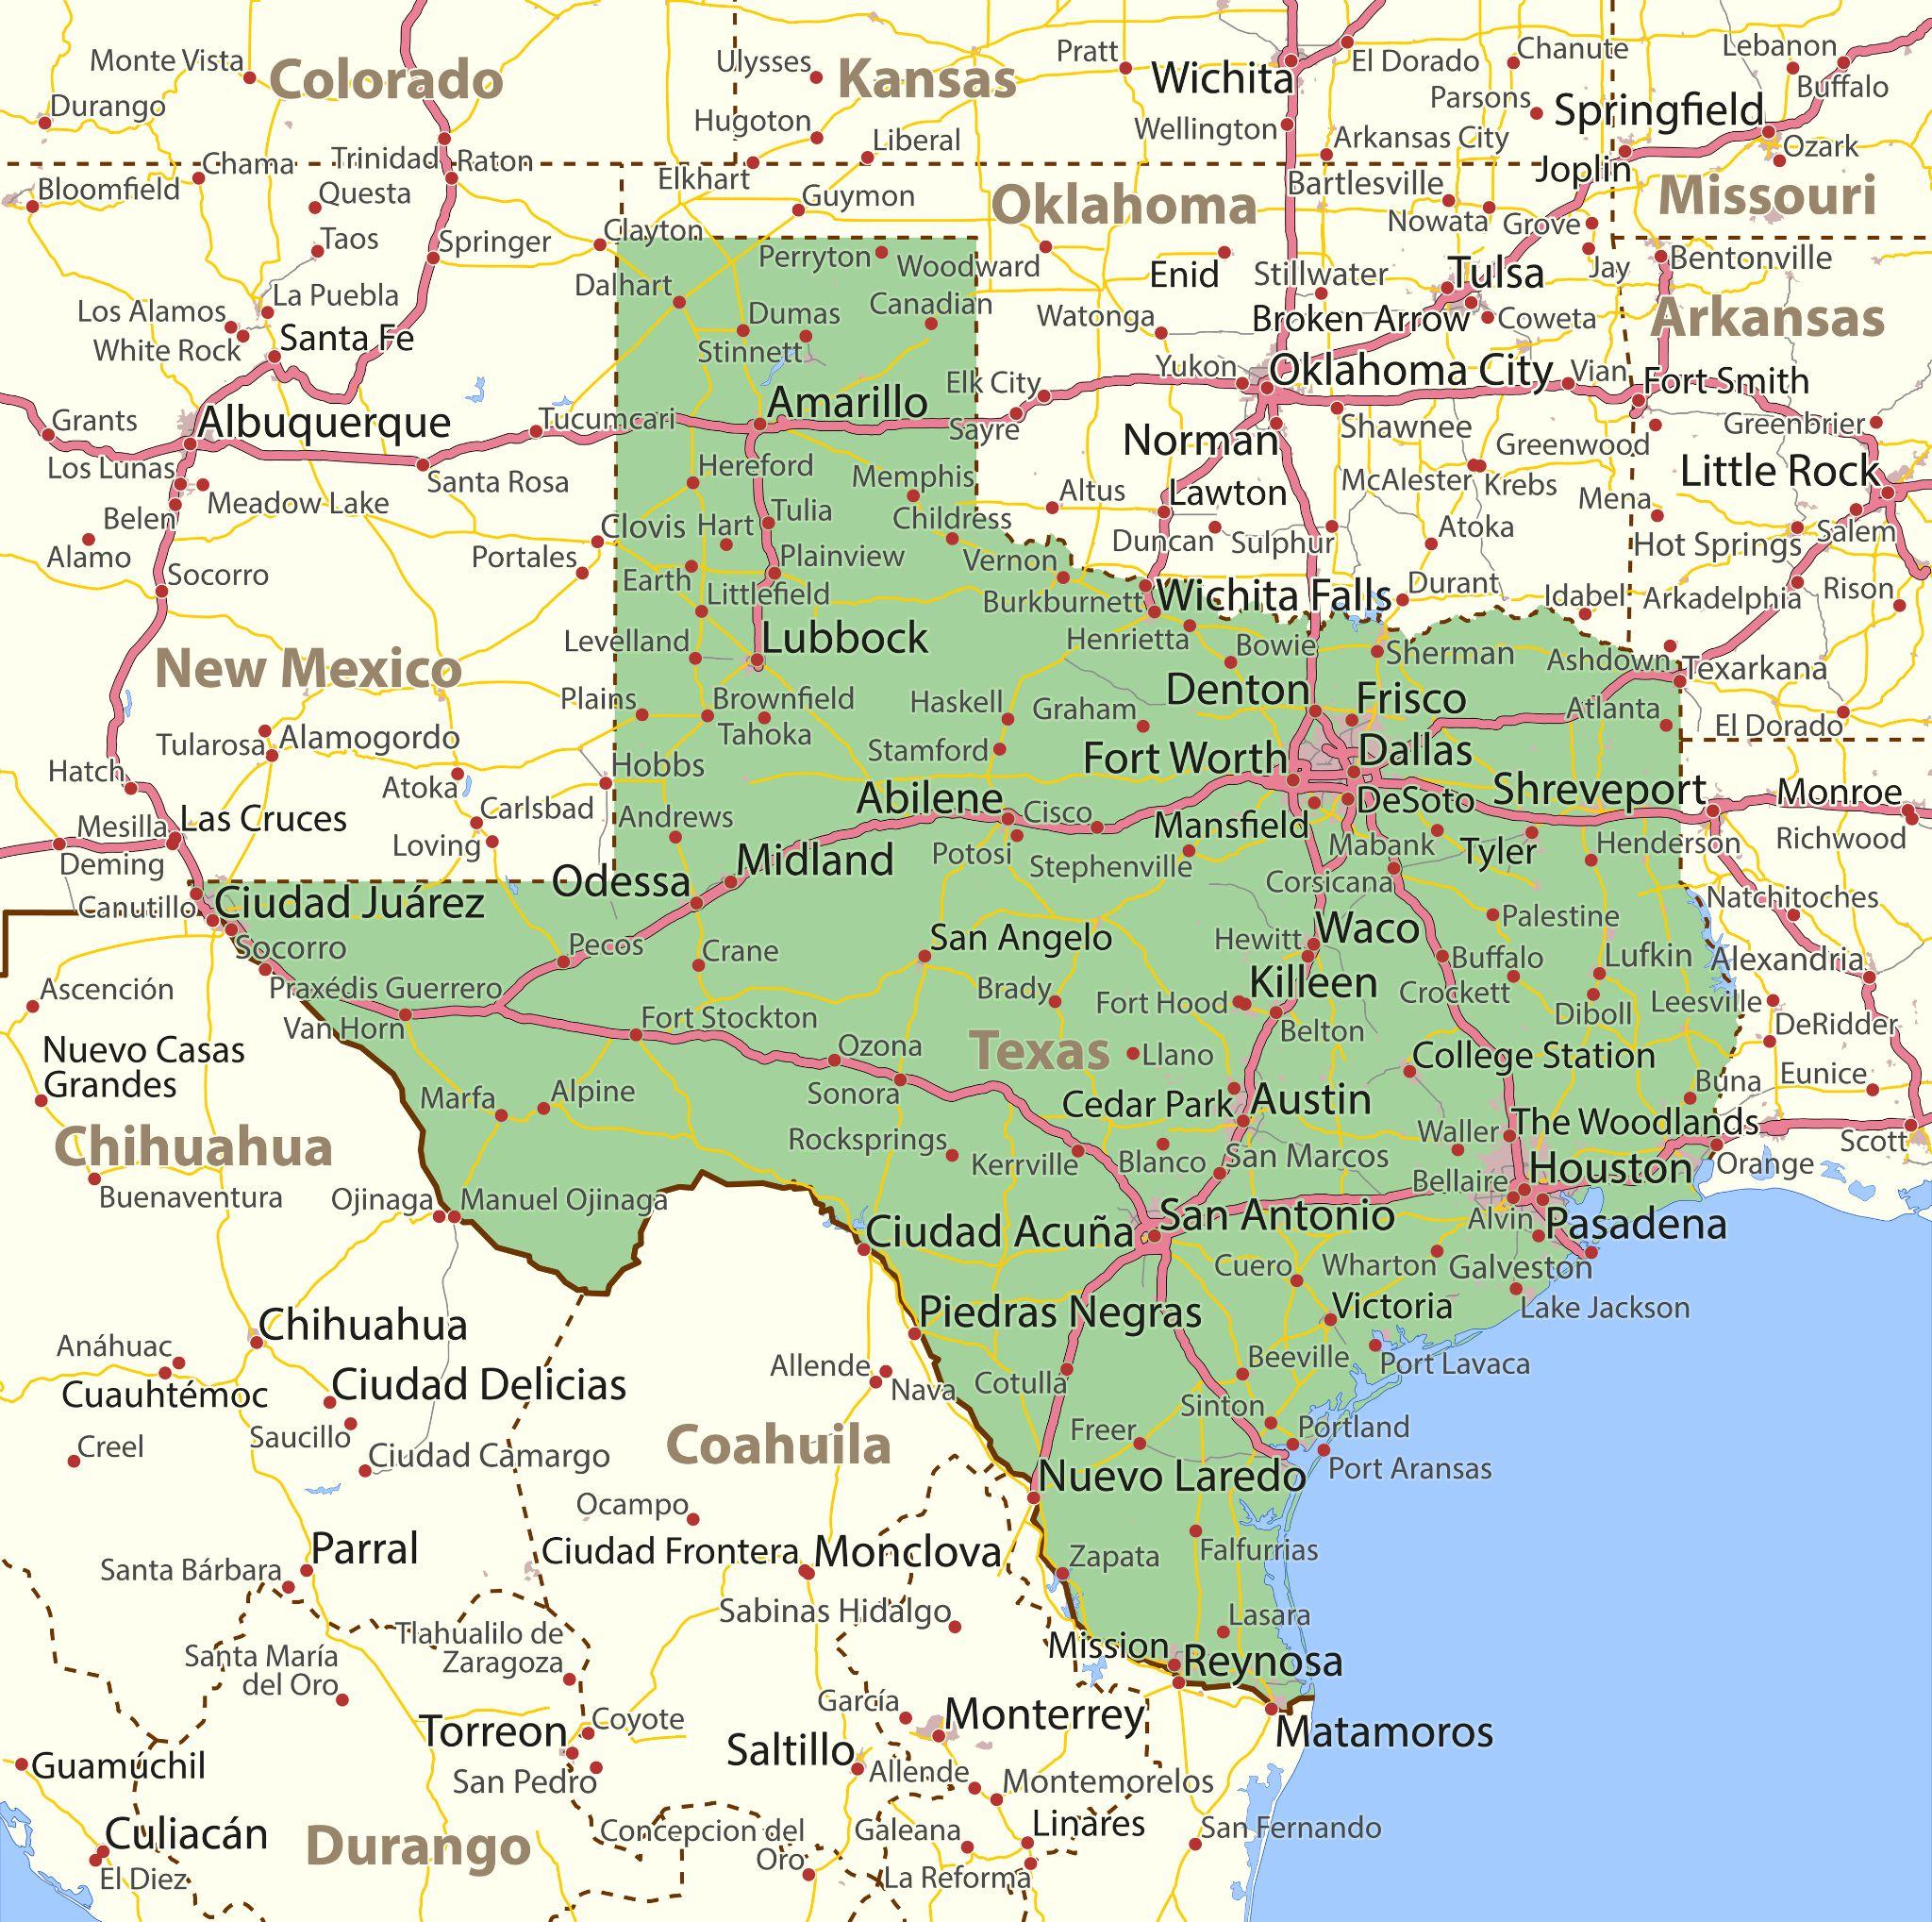 State of Texas overview road map